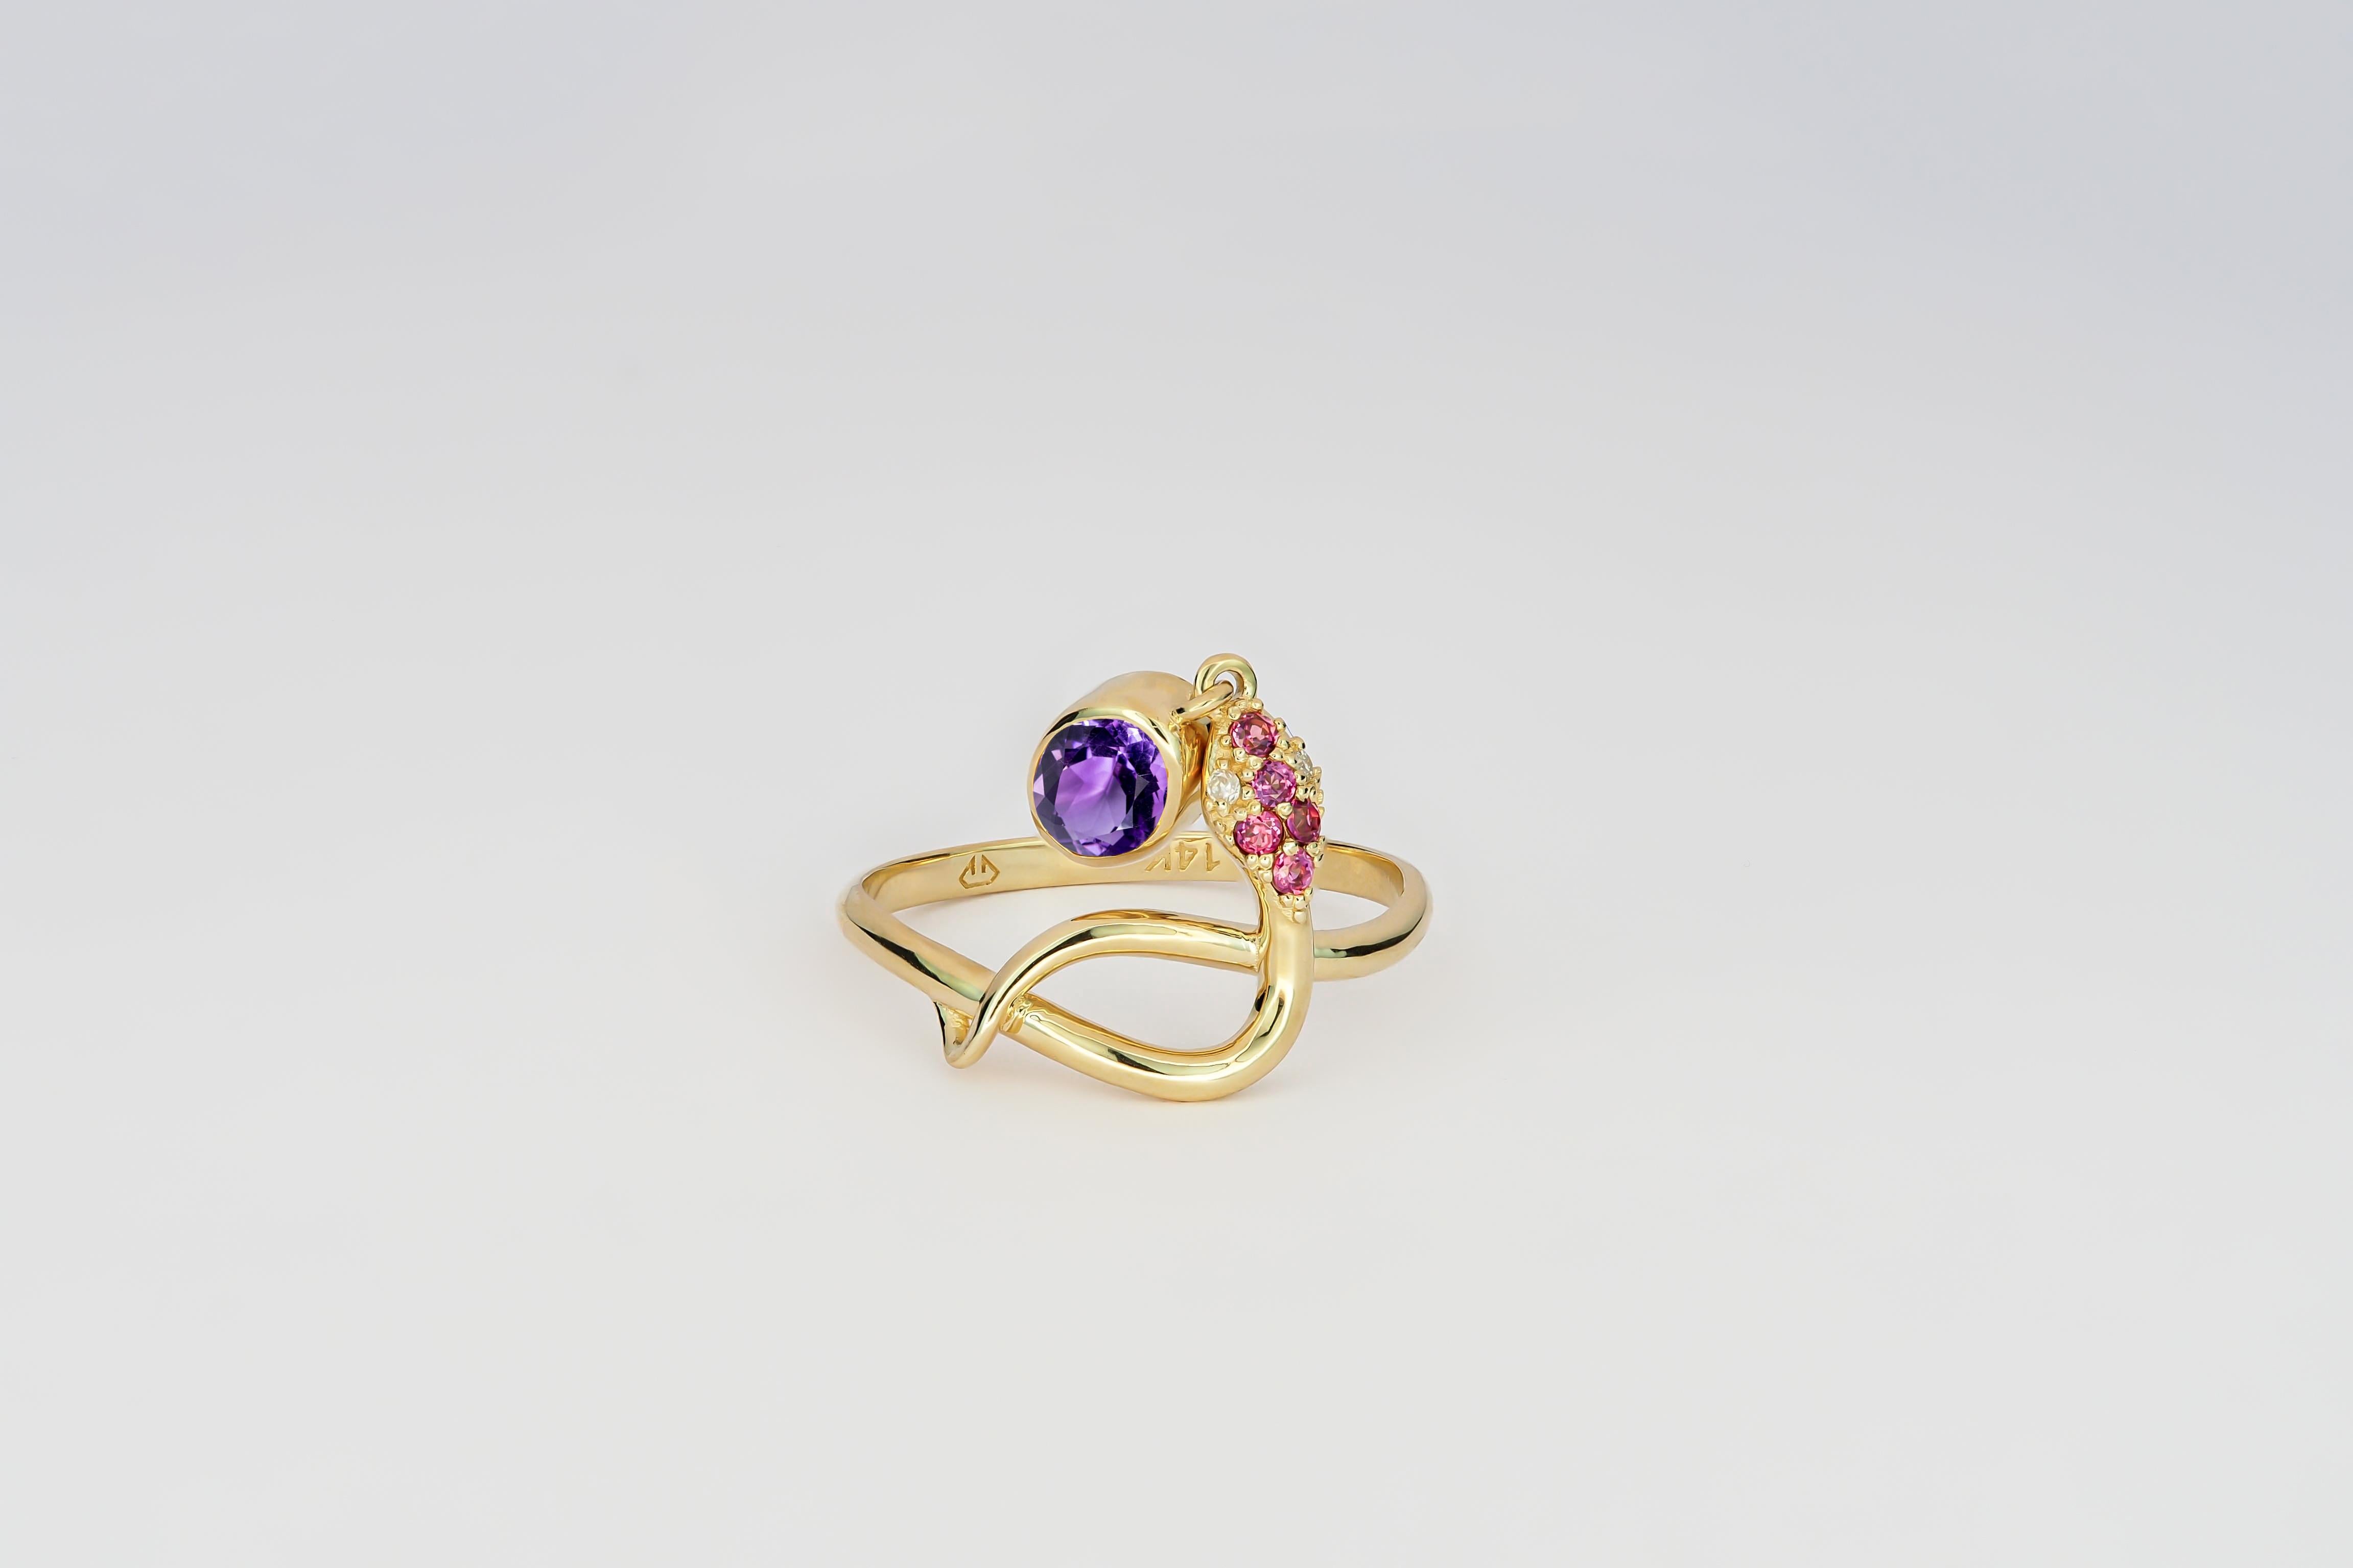 Snake ring with Amethyst. Amethyst gold ring. Snake gold ring. Genuine Amethyst ring. Oval Amethyst ring. February birthstone ring. Amethyst vintage ring. 
14k yellow gold ring with blue Amethyst, rose sapphires and diamonds. 

Metal: 14k